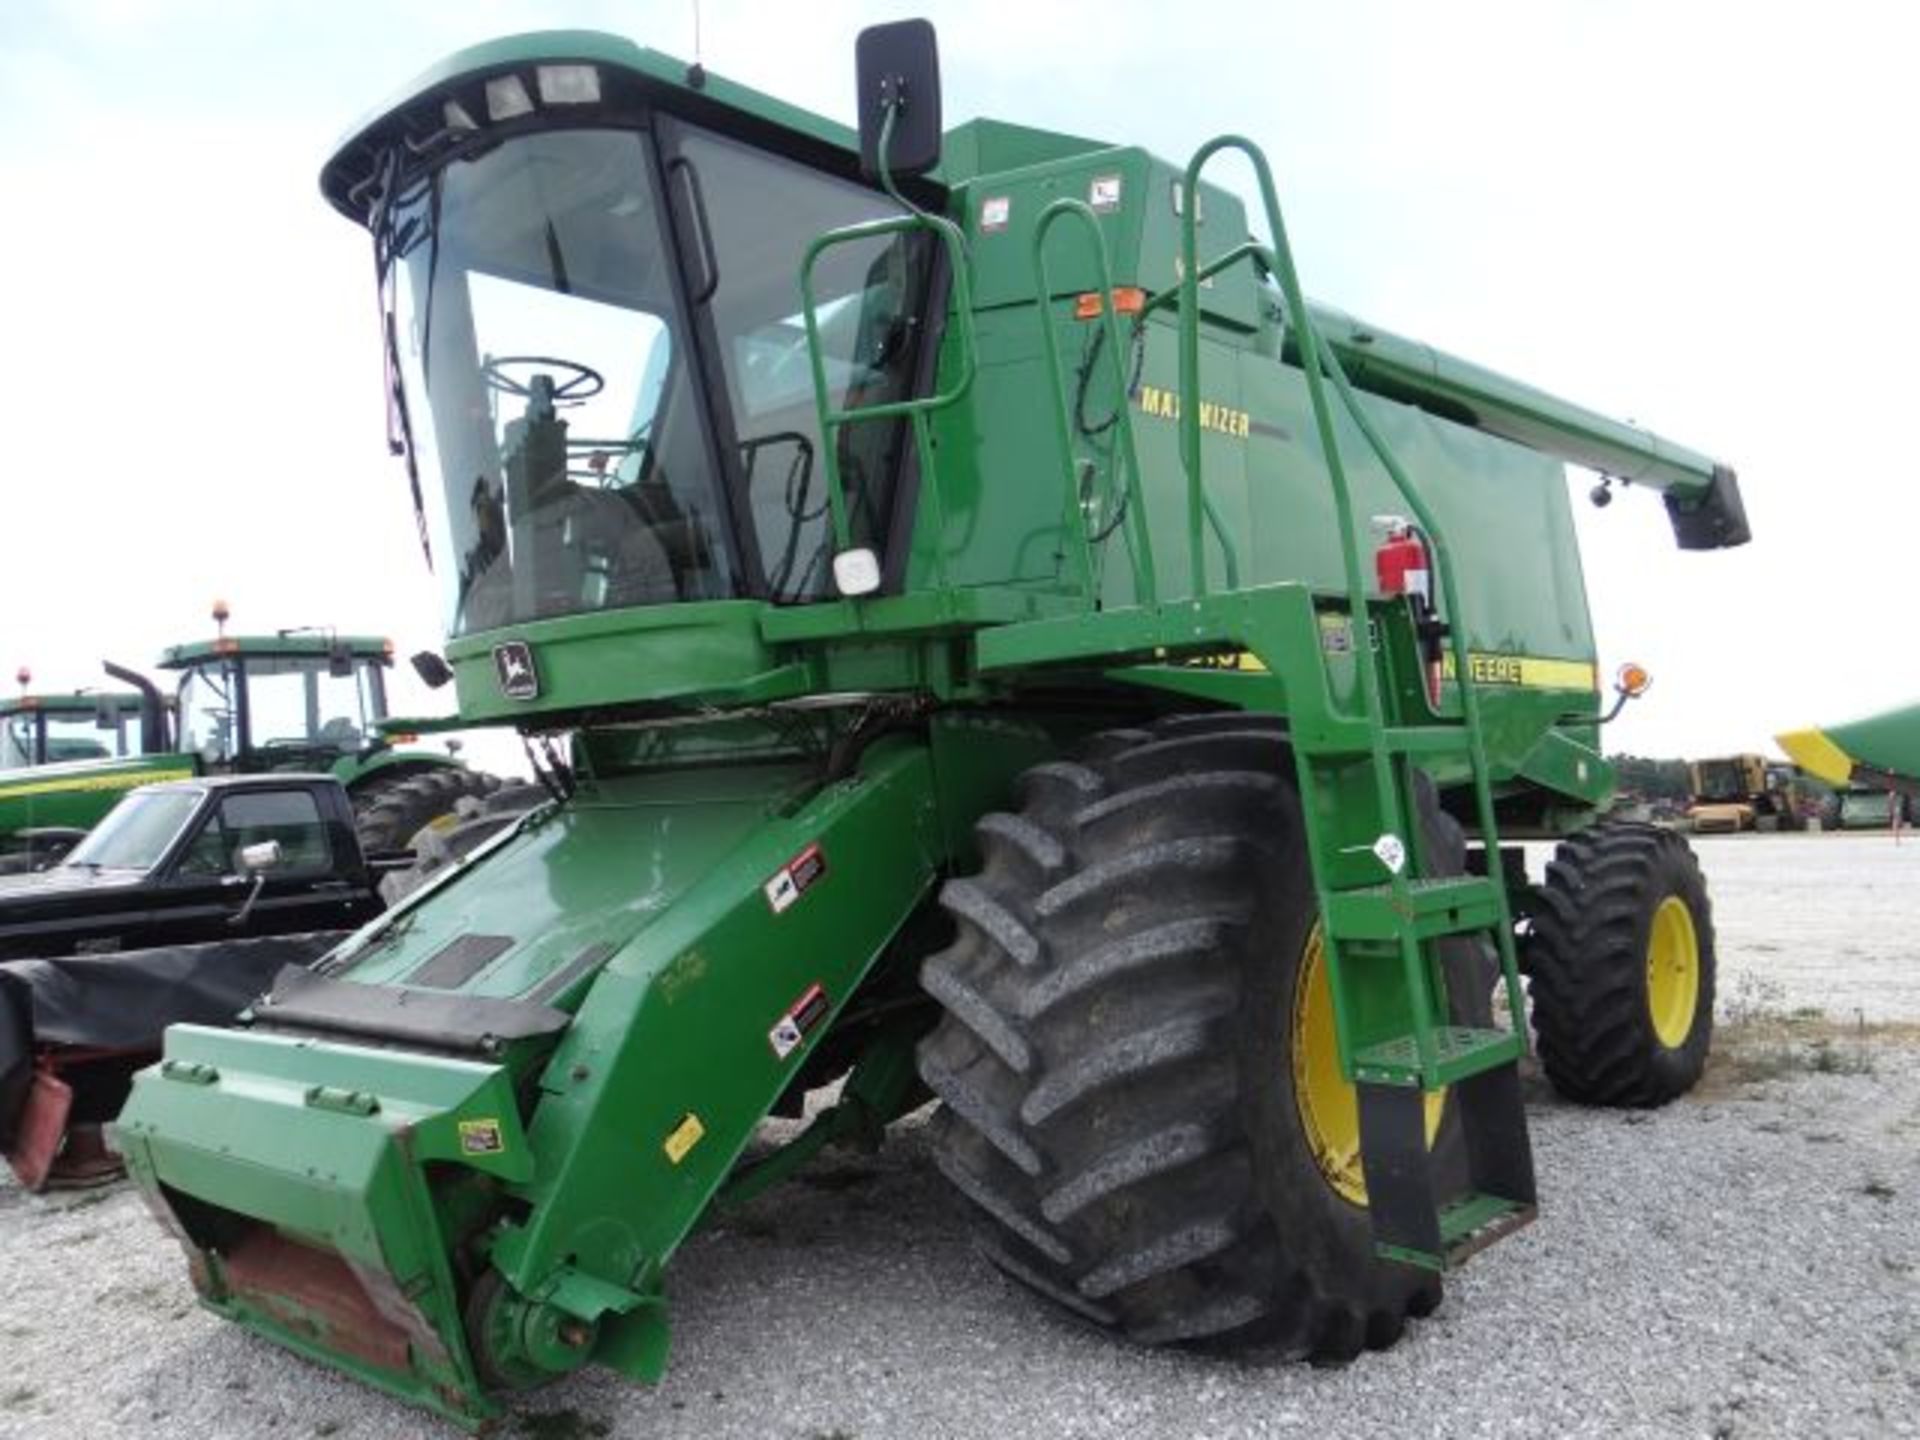 JD 9510 Combine 3444/2226 hrs, 4wd, CM, 73x44.00/32 Front Tires and 18.4x26 Rear Tires, Manual in